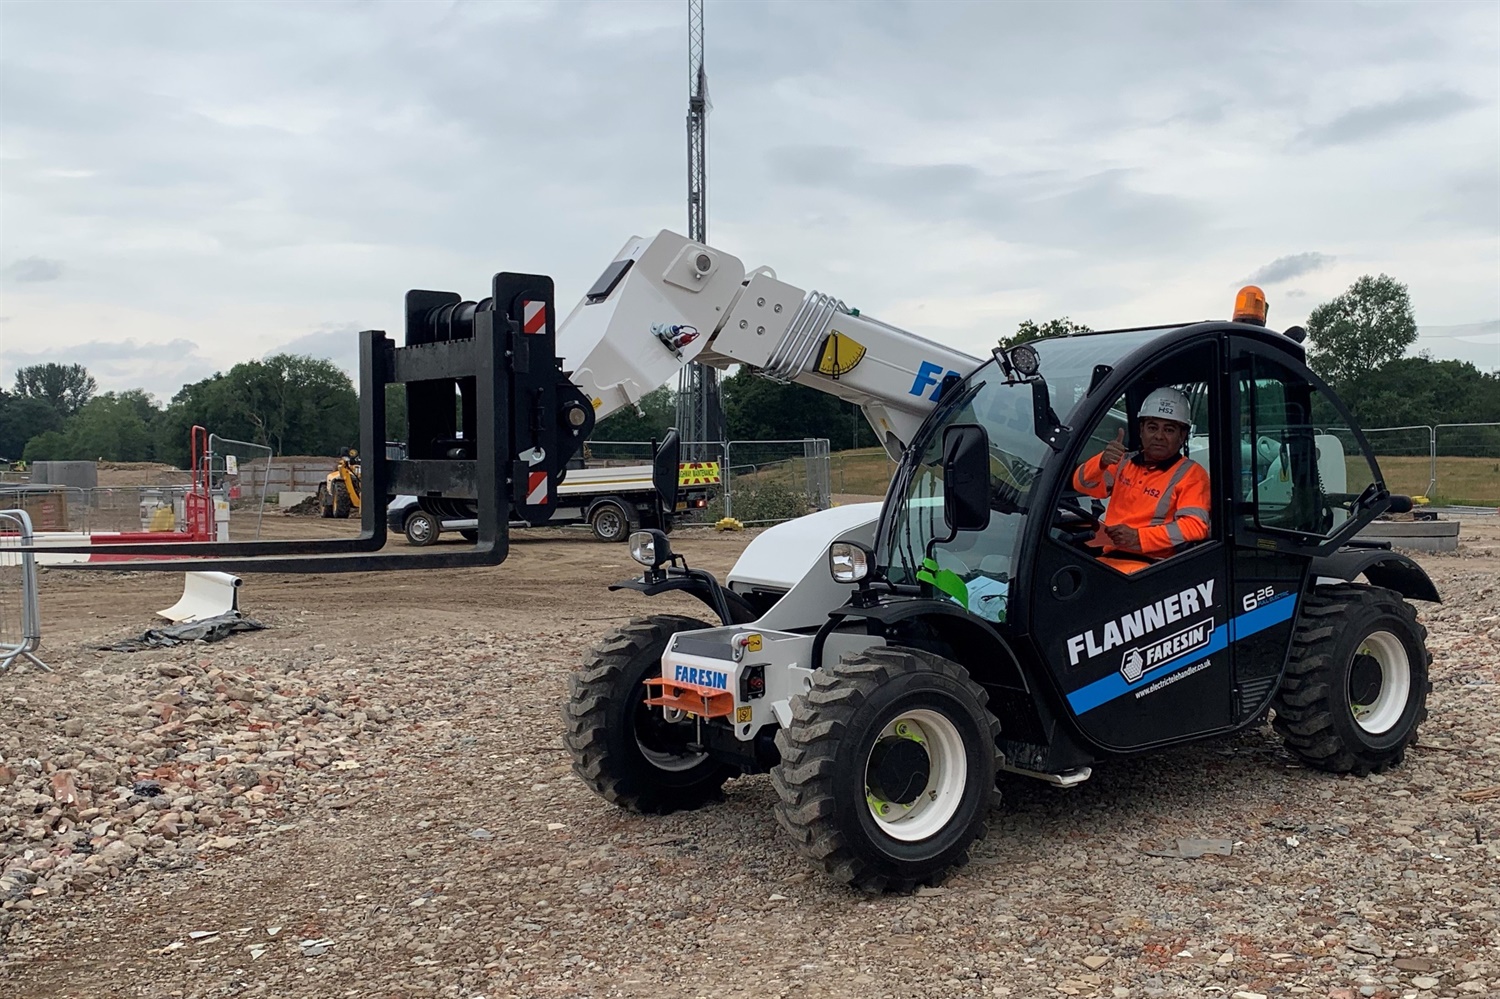 HS2 trials UK’s first electric forklift 